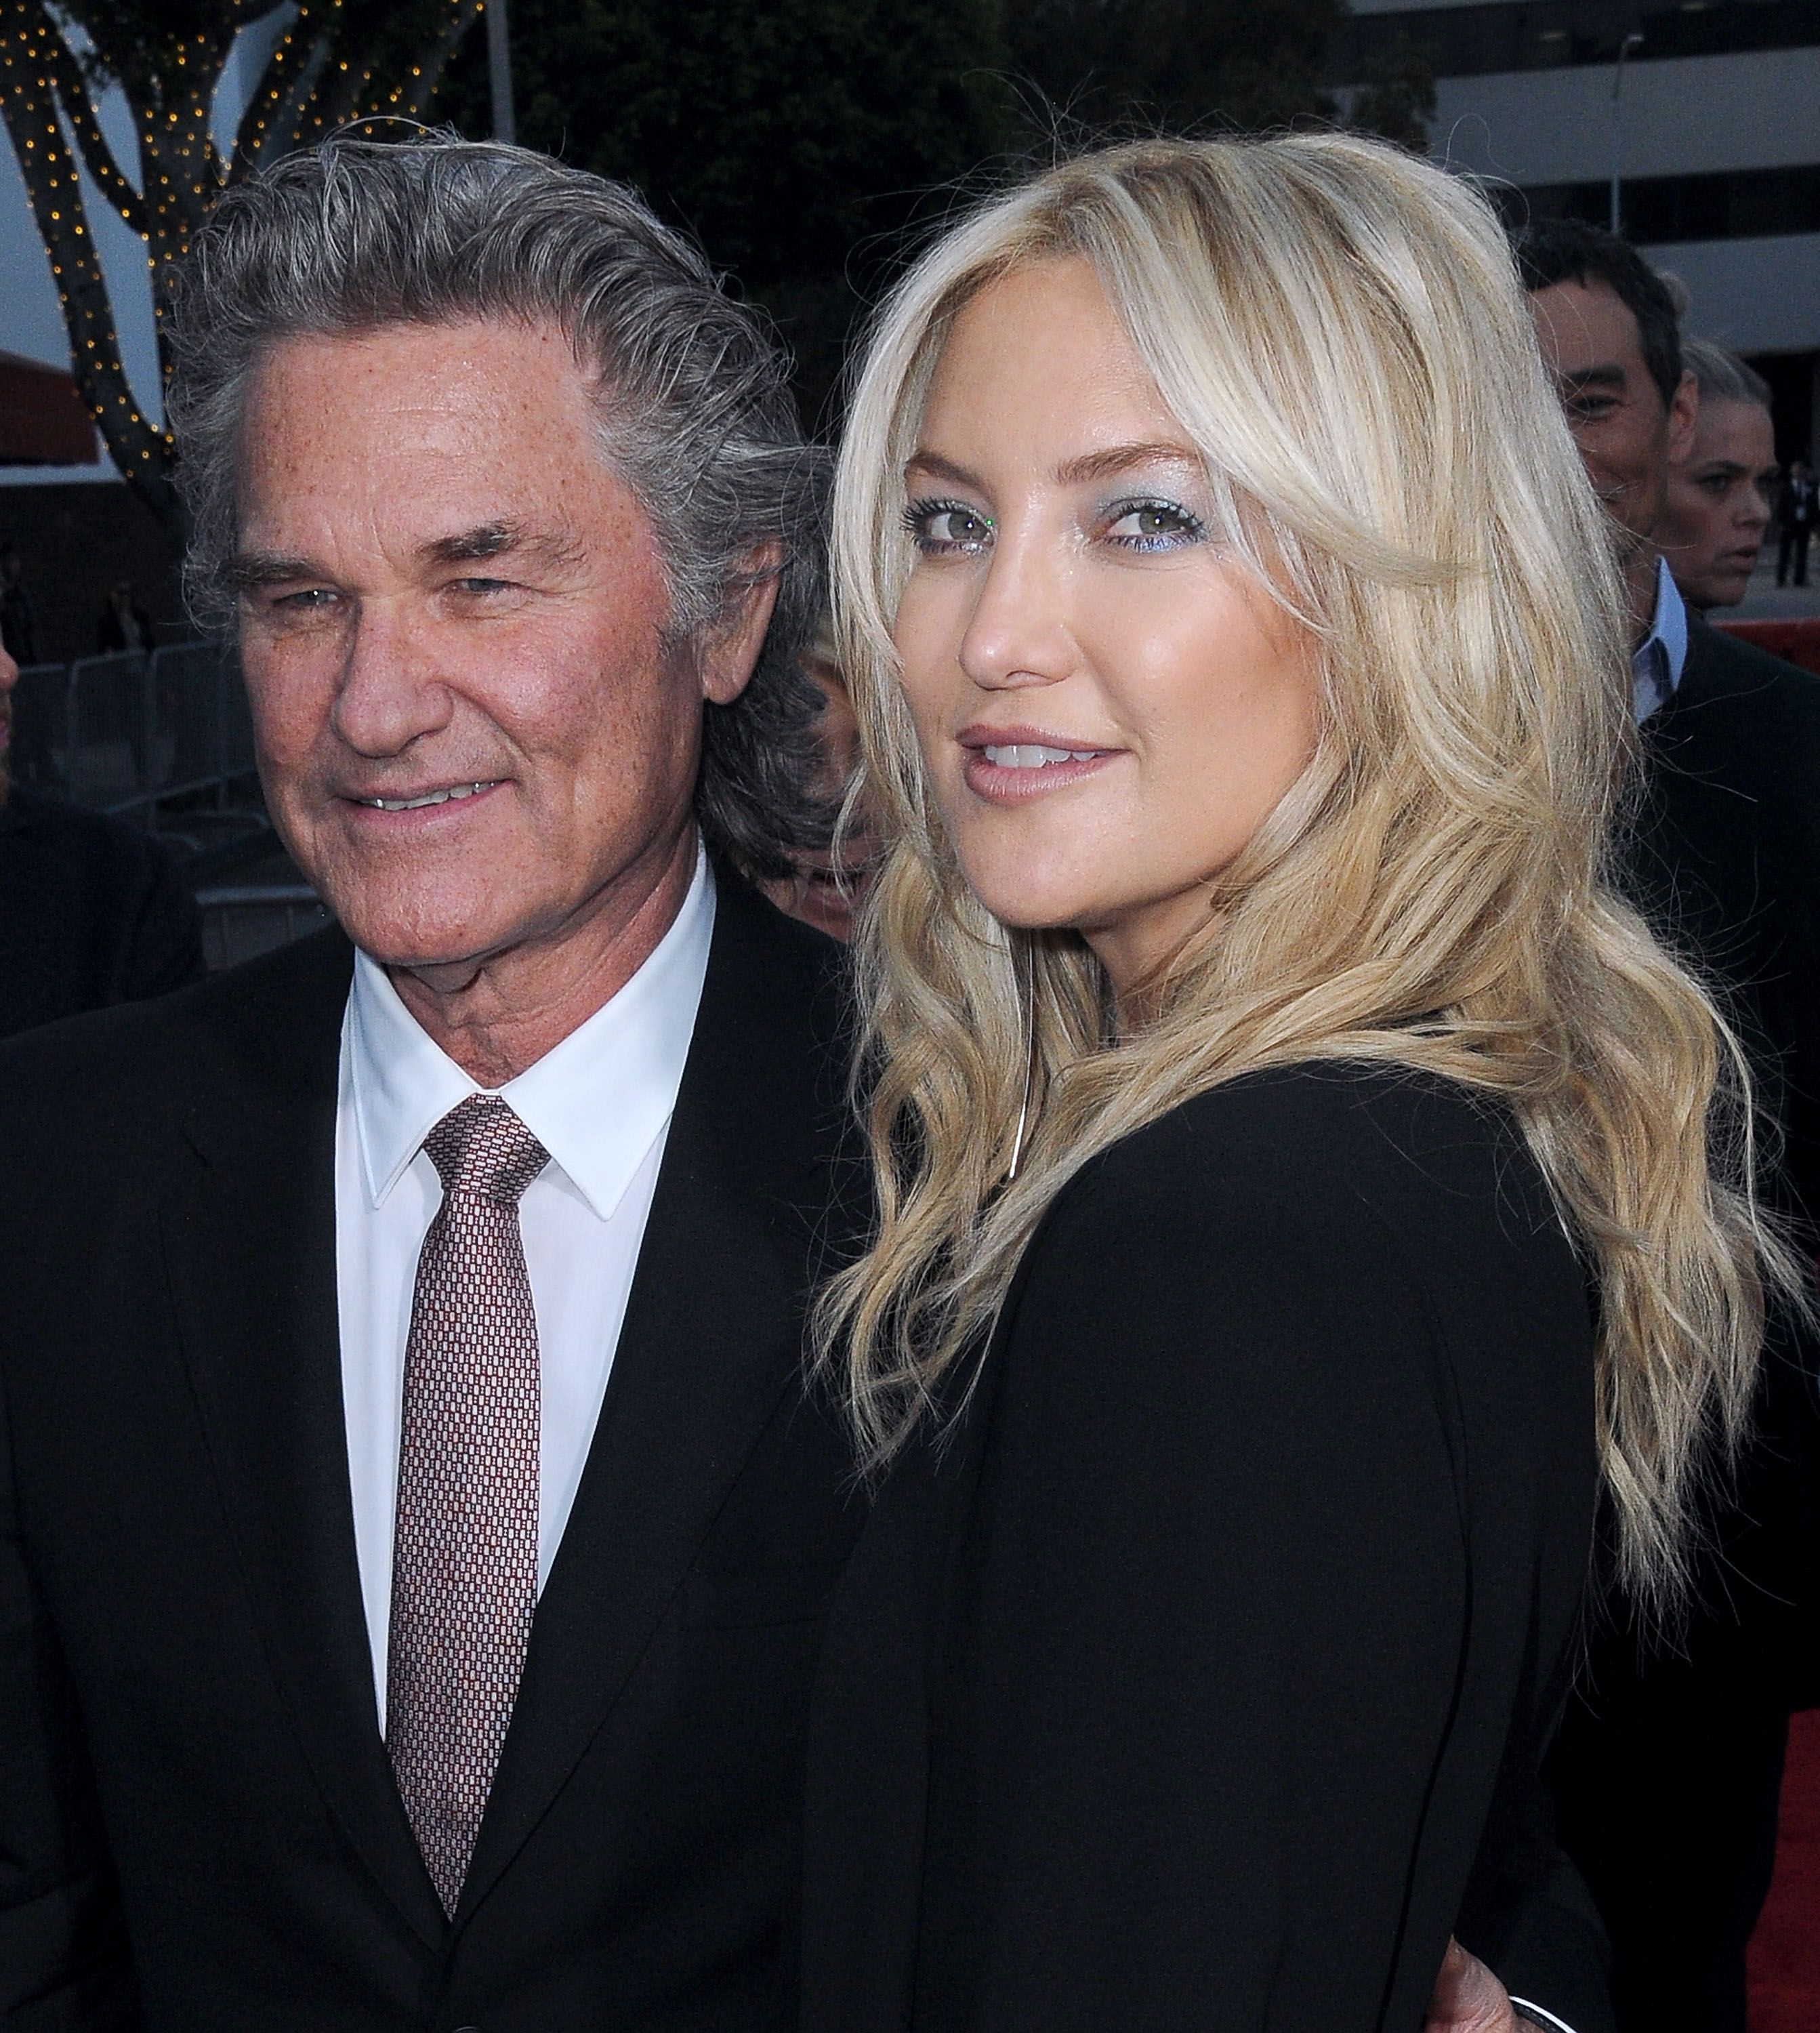 Kurt Russell and Kate Hudson at the premiere of "Snatched" in Westwood, California on May 10, 2017 | Source: Getty Images